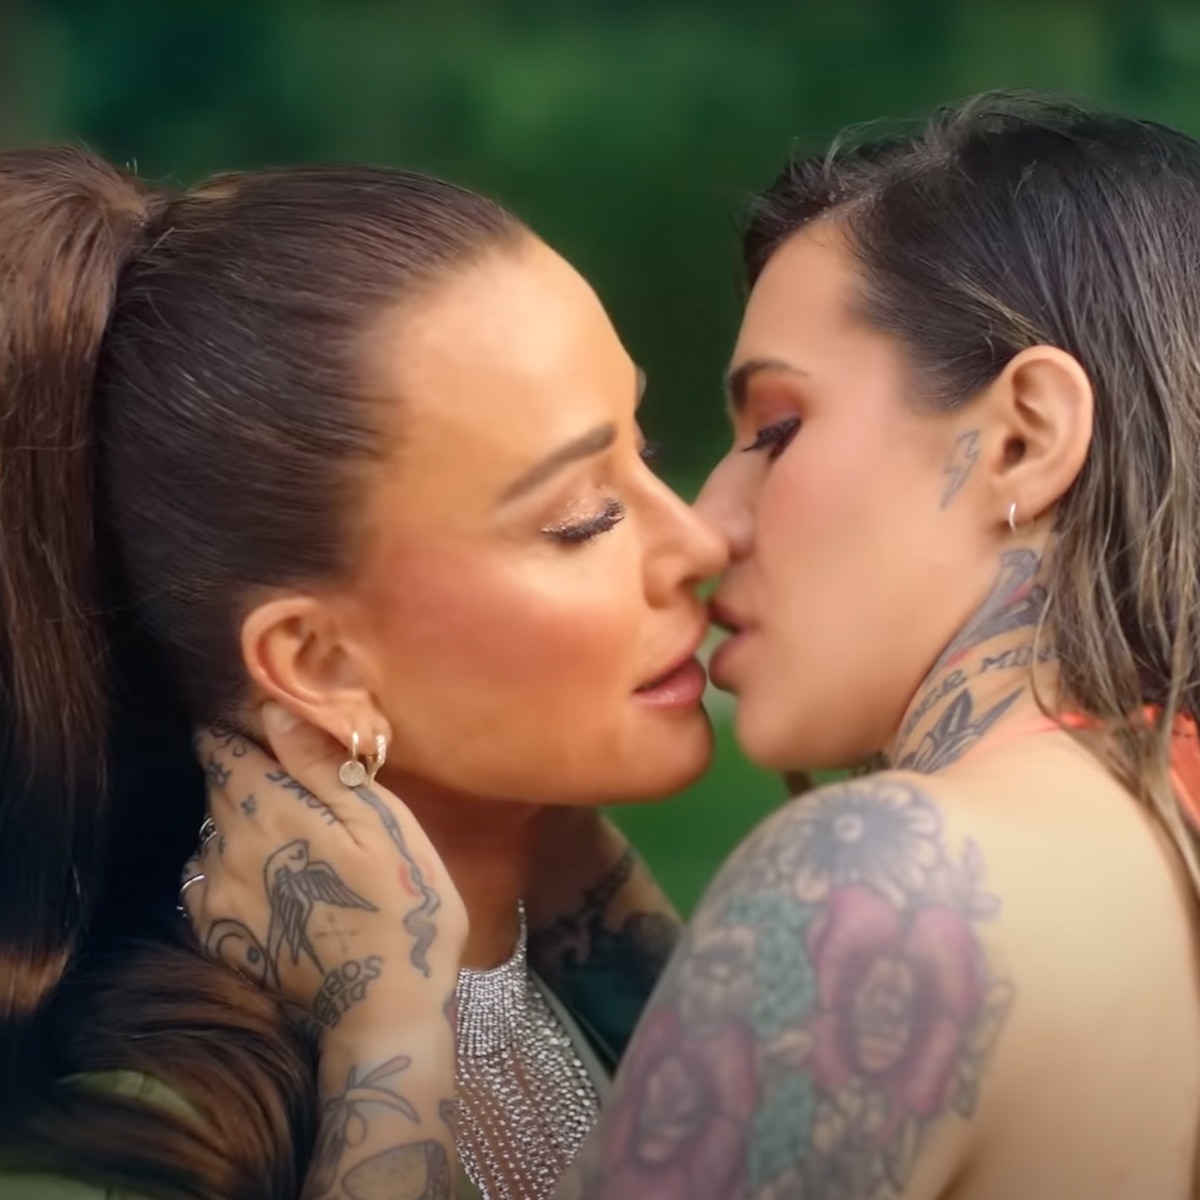 Kyle Richards and Morgan Wade Strip Down in Steamy New Music Video pic